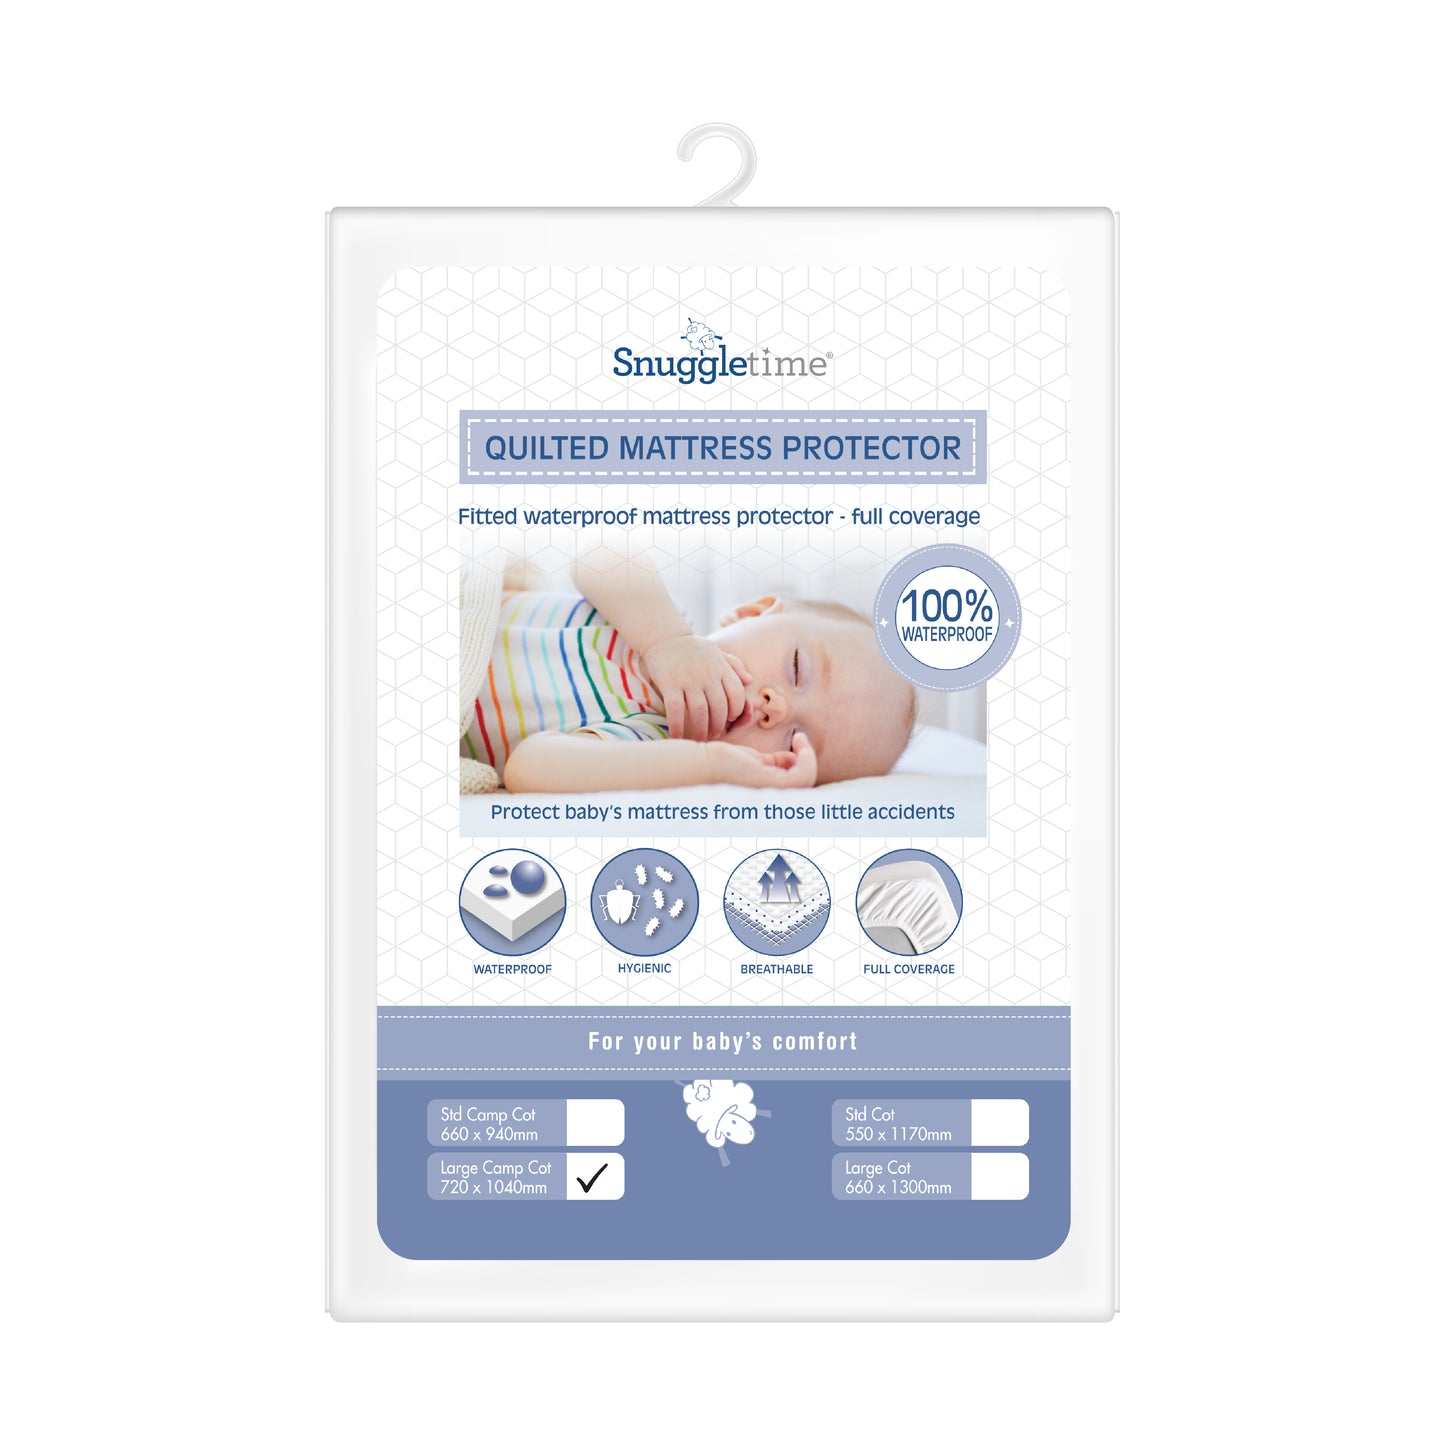 Snuggletime Quilted Mattress Protector